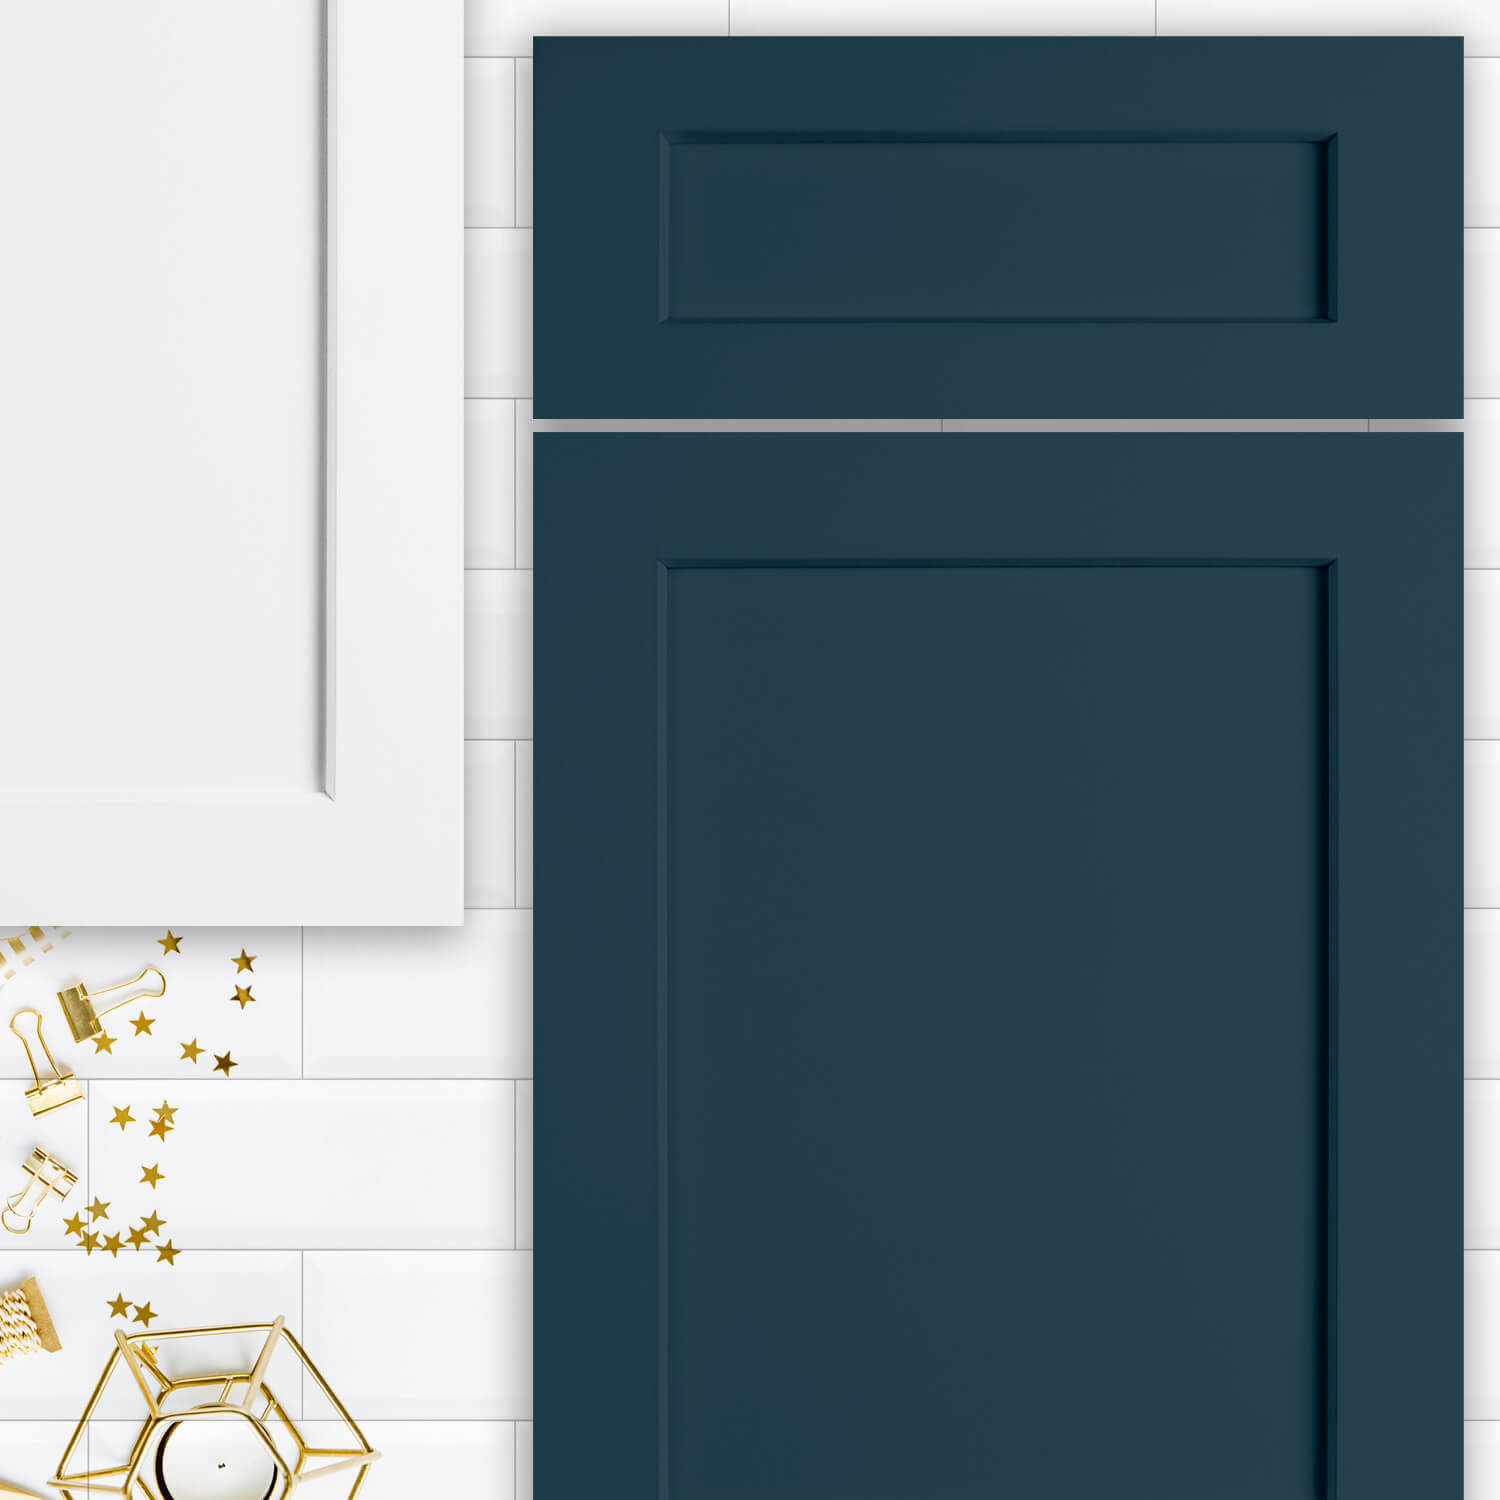 A mood board with two shaker door styles lying on white subway tile. One cabinet door is painted navy blue and the other white.